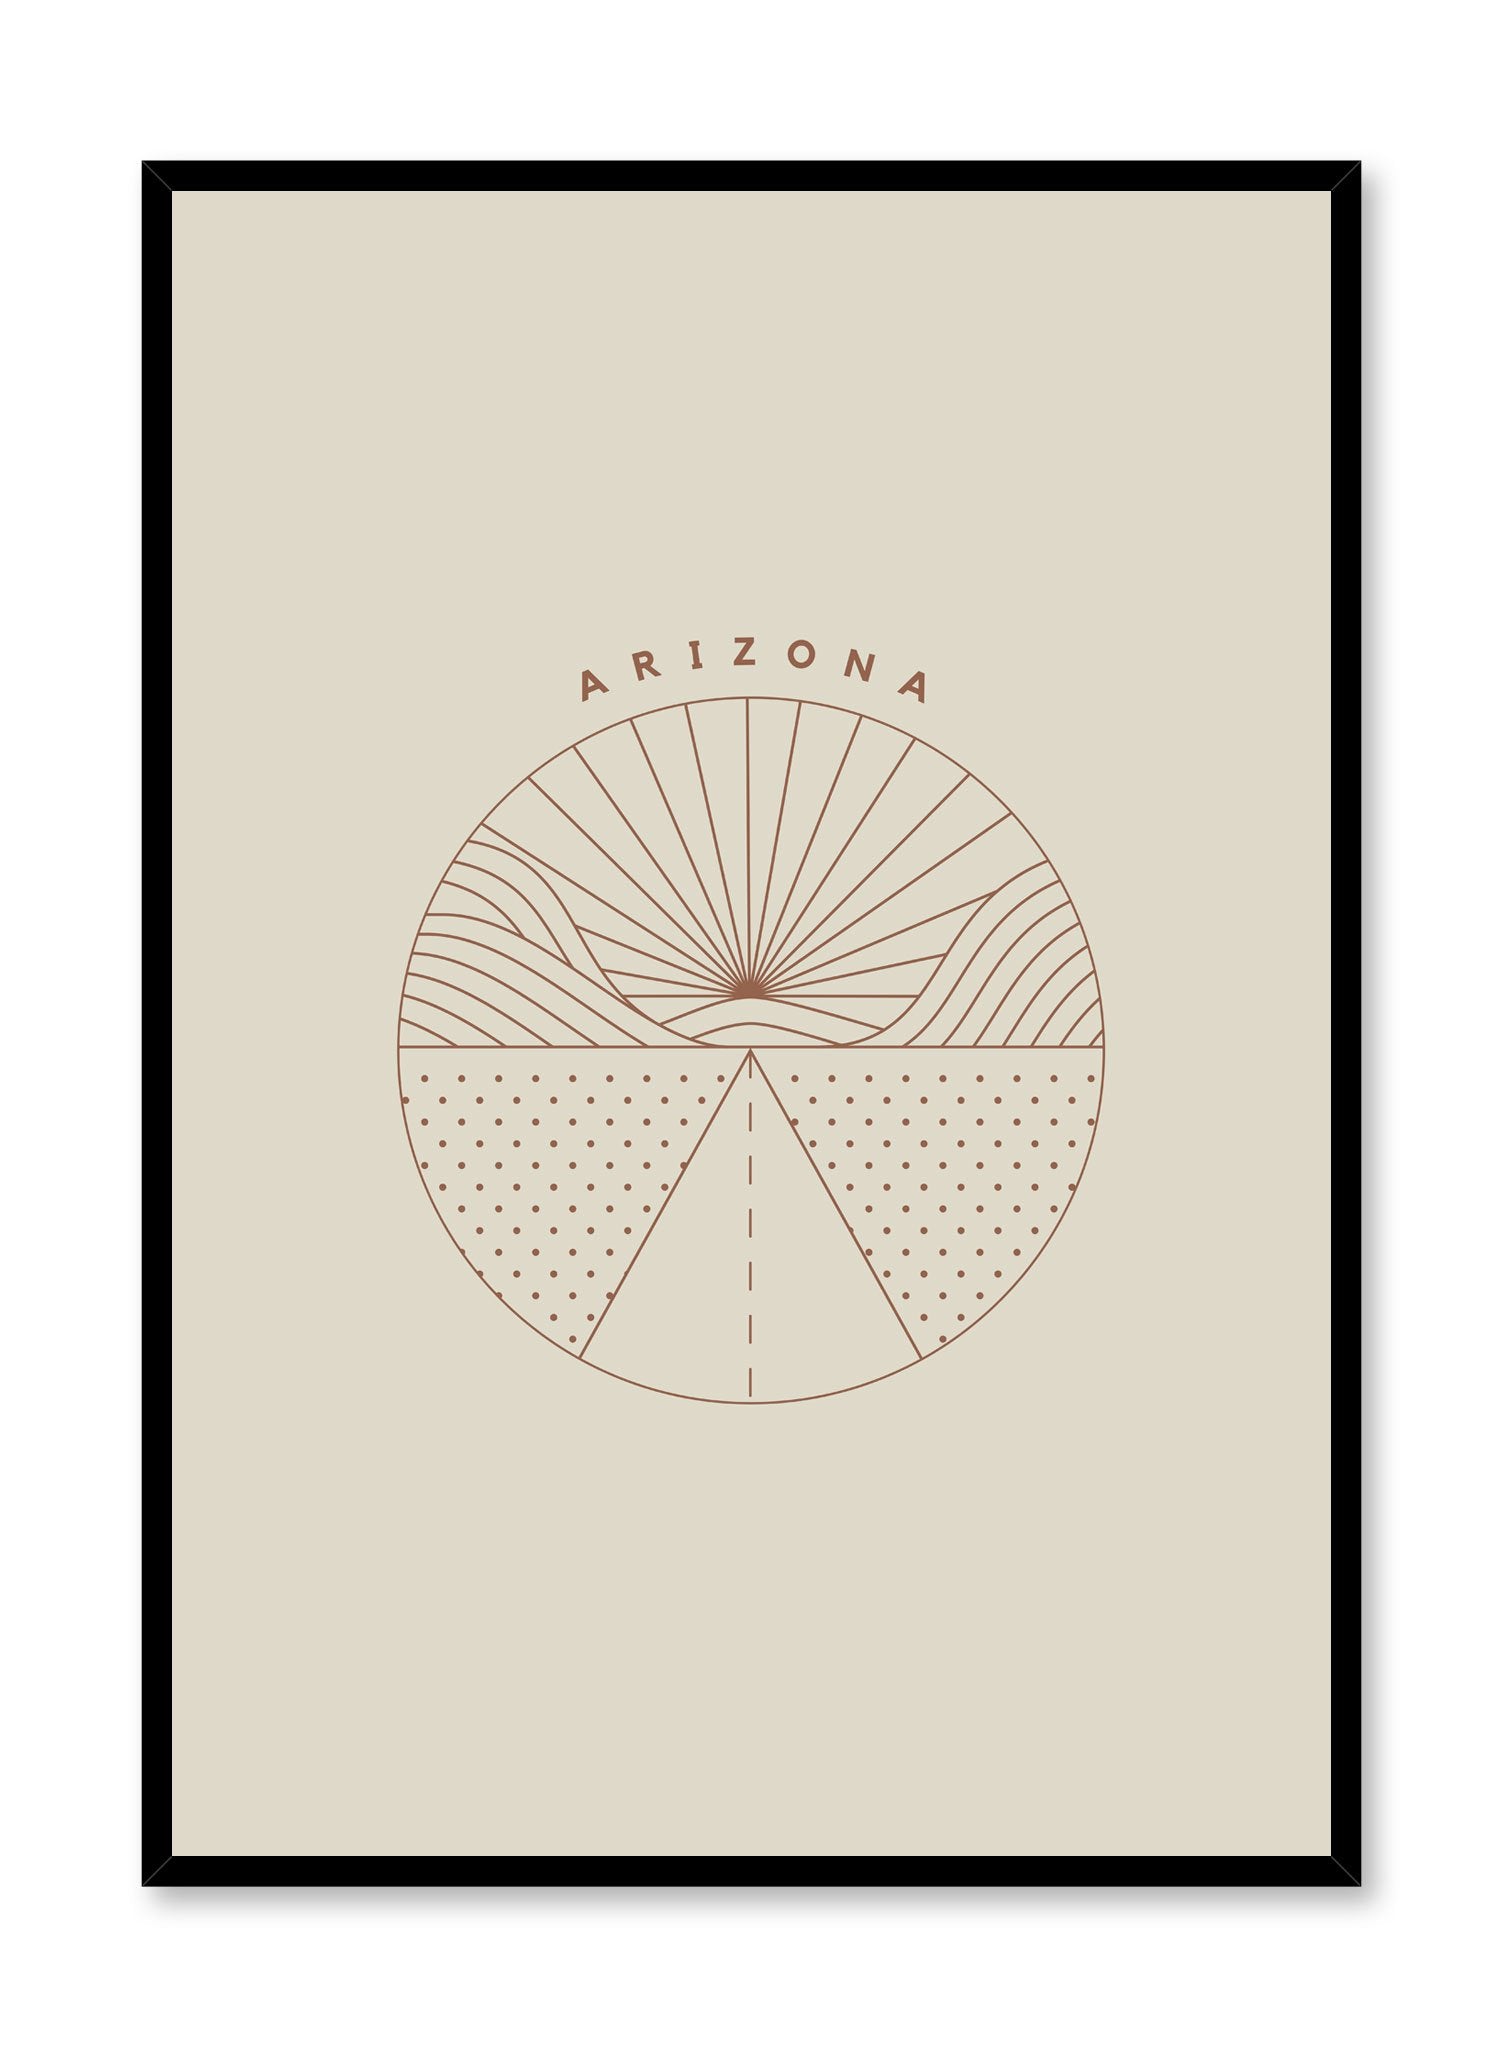 Minimalist design poster by Opposite Wall with Arizona abstract graphic design of landscape